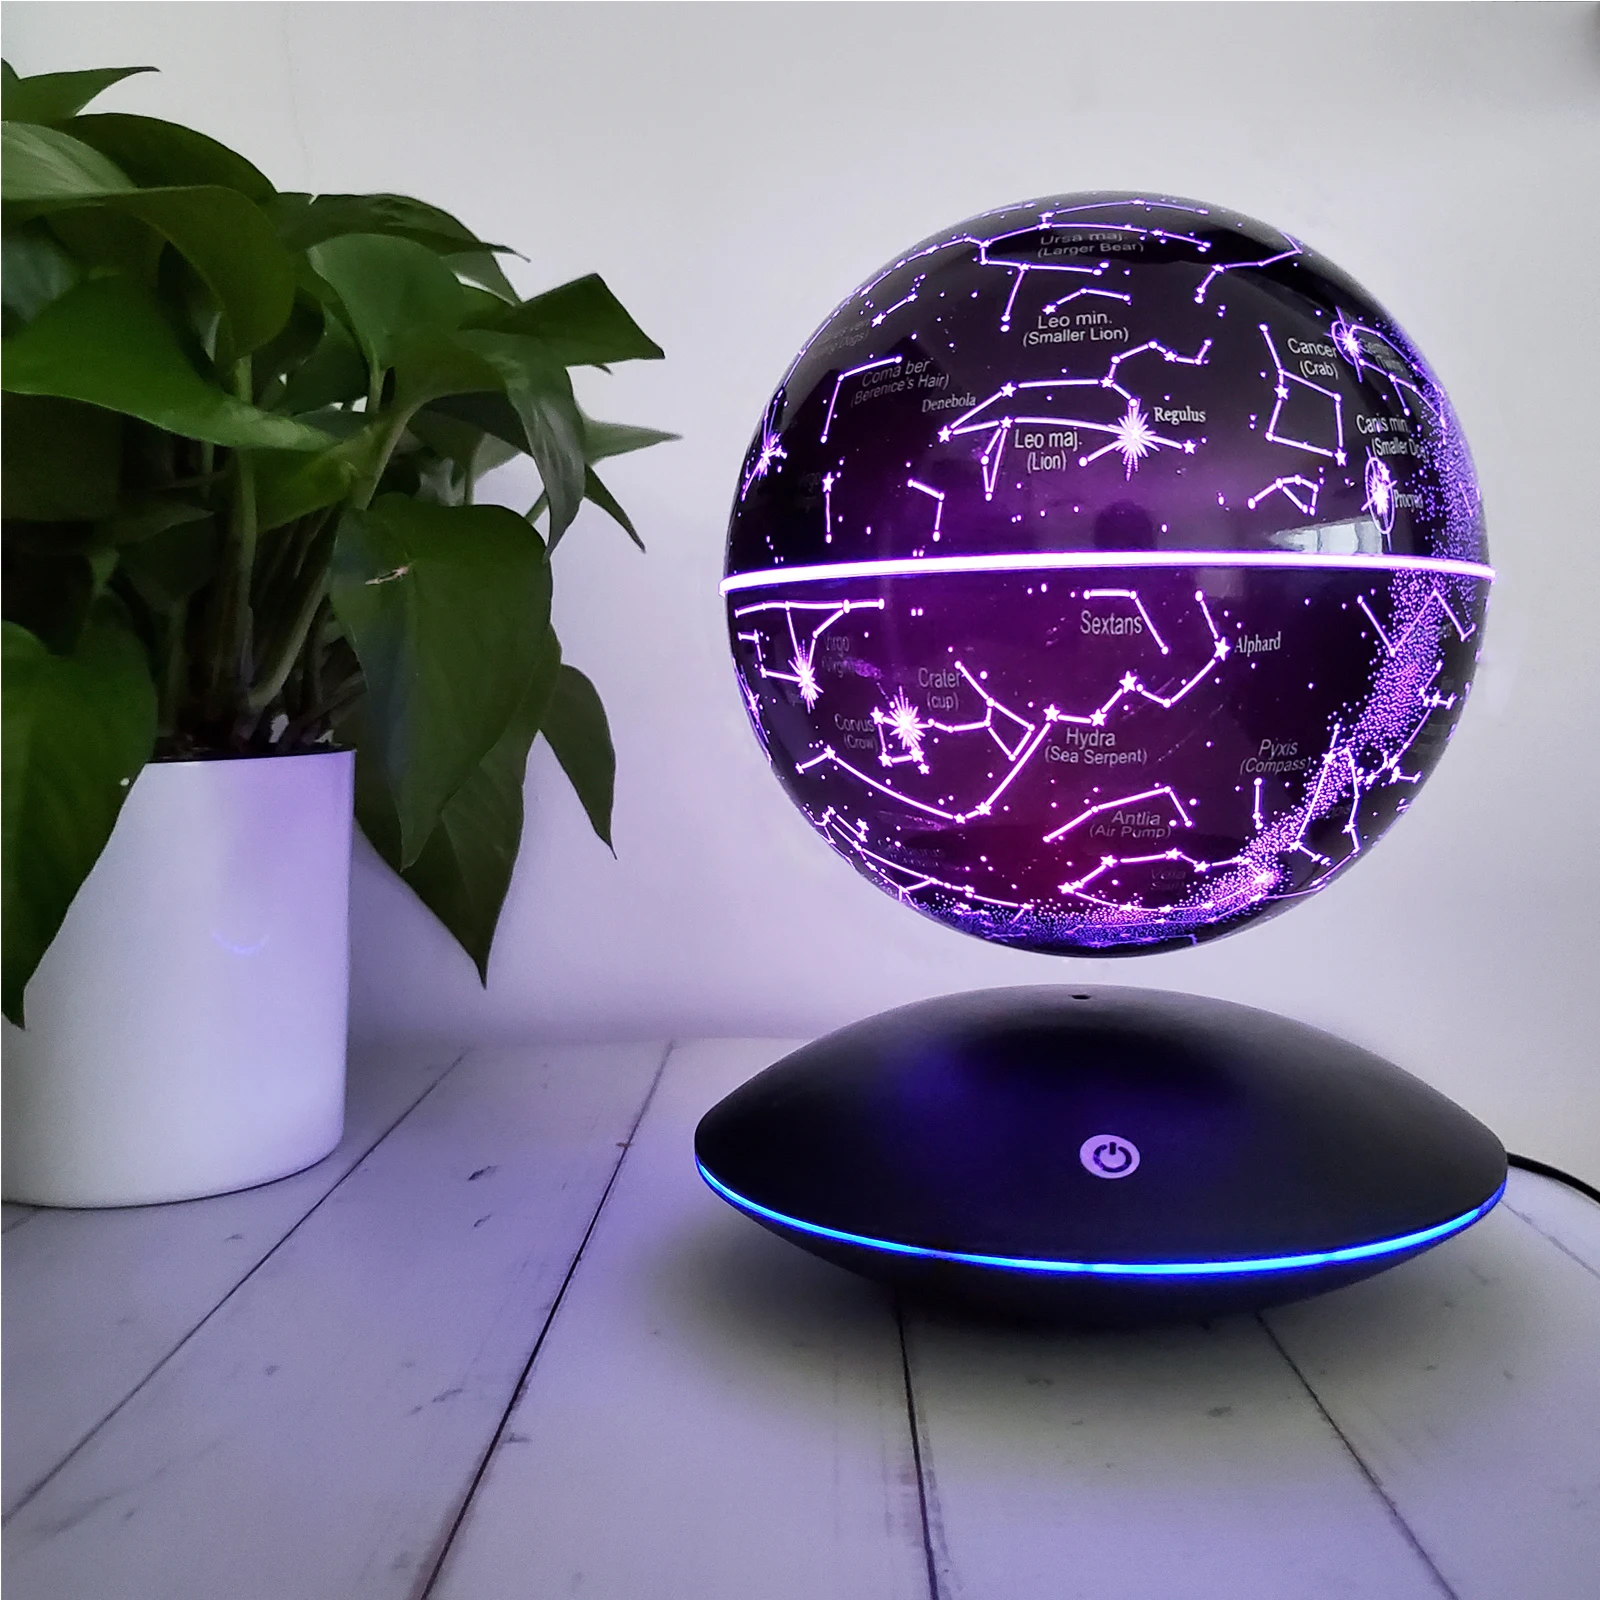 https://ae01.alicdn.com/kf/H7f6b84ef27c64ab9943a94d0d57d1c89n/Magnetic-Levitation-Globe-Floating-Constellation-Ball-6inch-Unique-Table-Lamp-LED-Starlight-Ball-Special-Gifts-Home.jpg